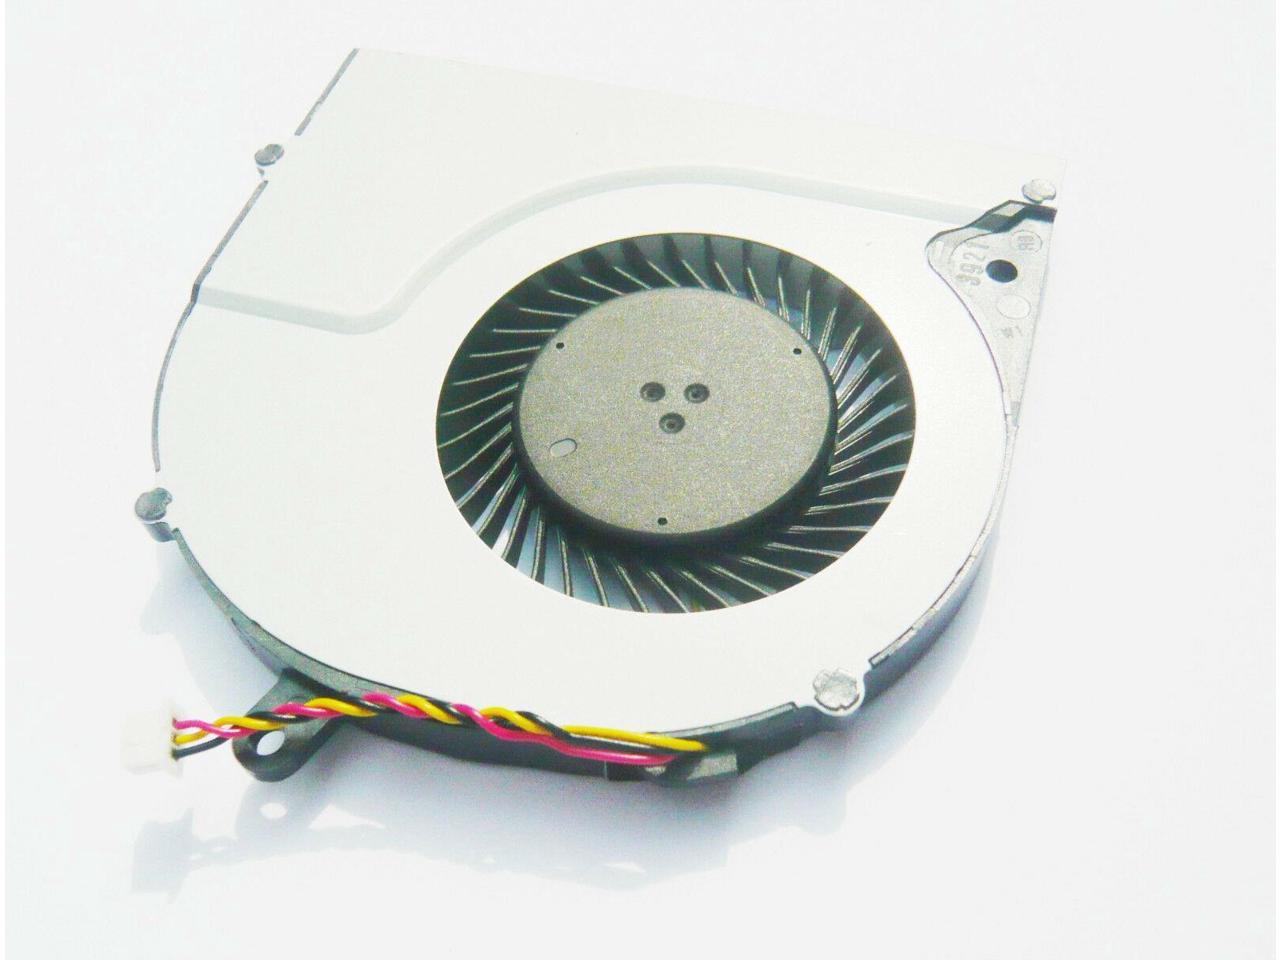 New For KSB0805HB-CL1X KSB0805HB-CL2C CPU Fan with Silicone grease 